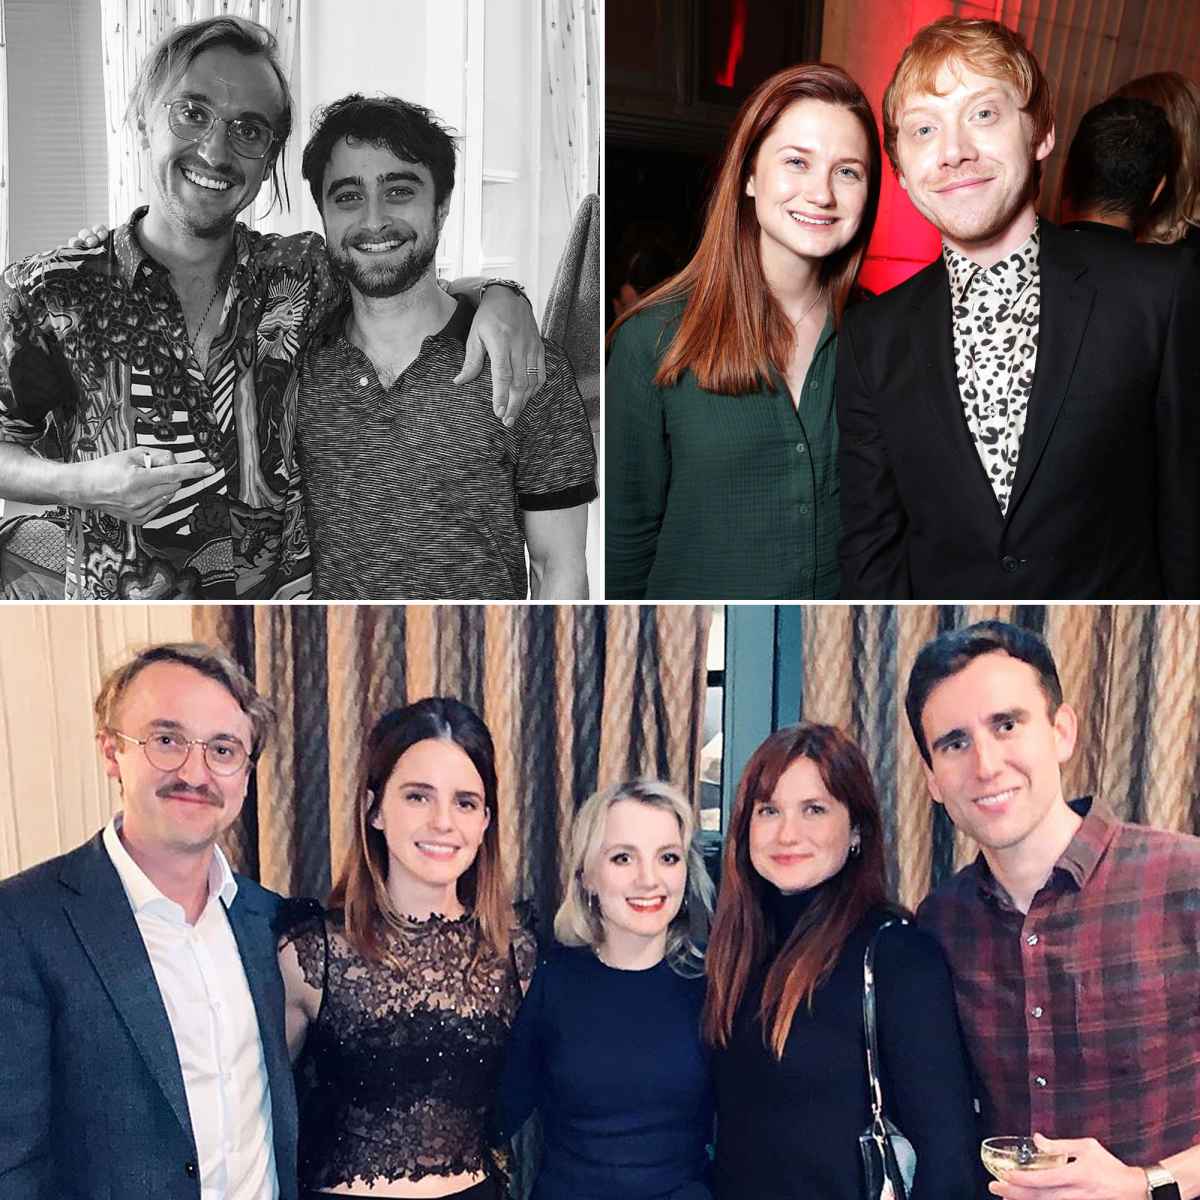 The Friendship and Camaraderie Among the Harry Potter Cast 2